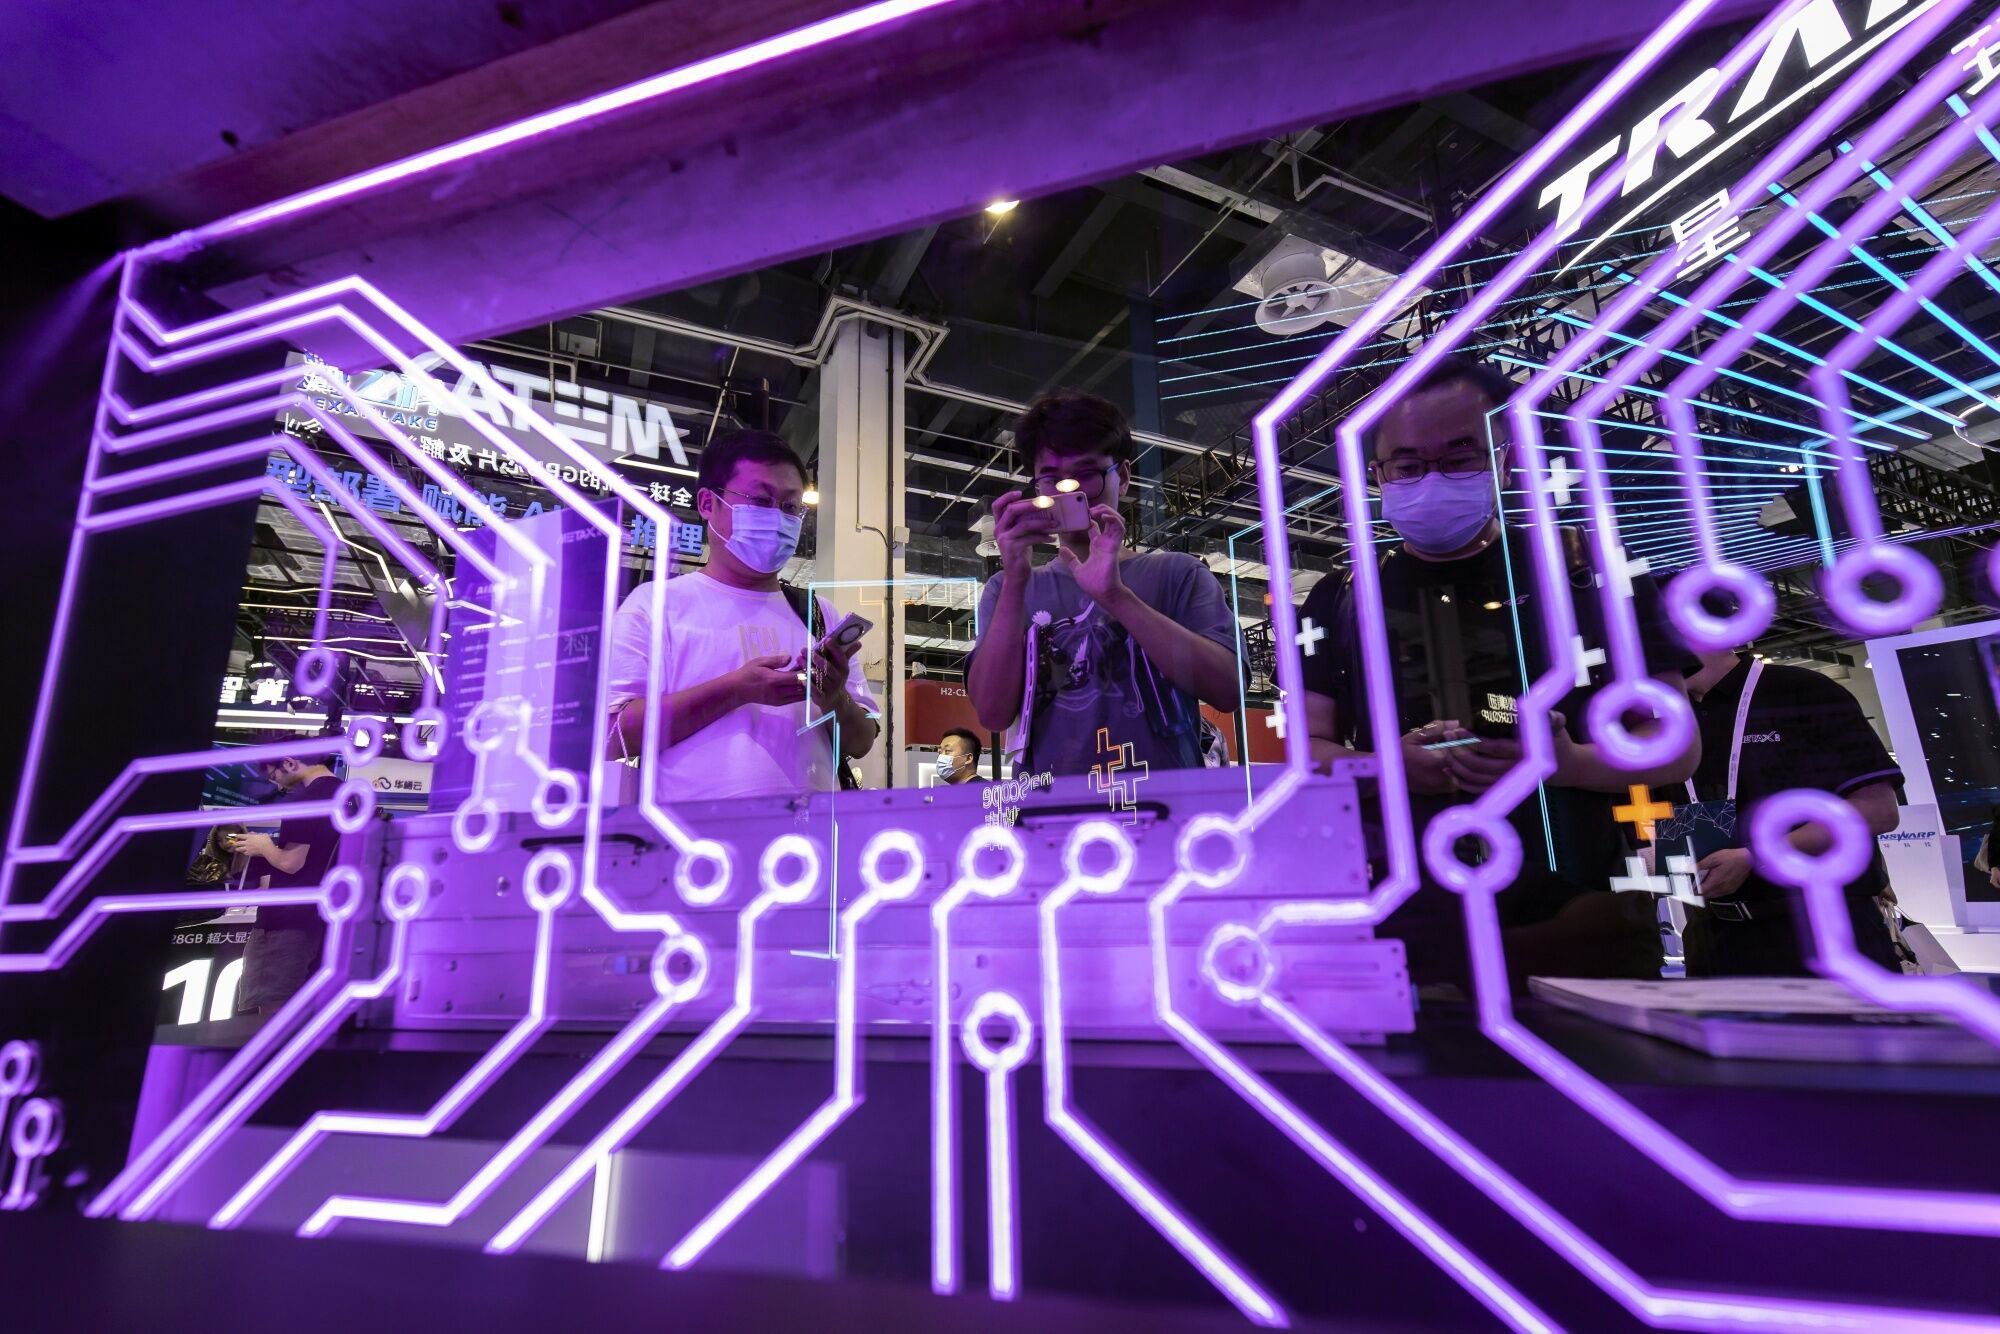 Analysts say China faces difficulties in developing indigenous computing power in the face of US bans on high-performance chips. Photo: Bloomberg